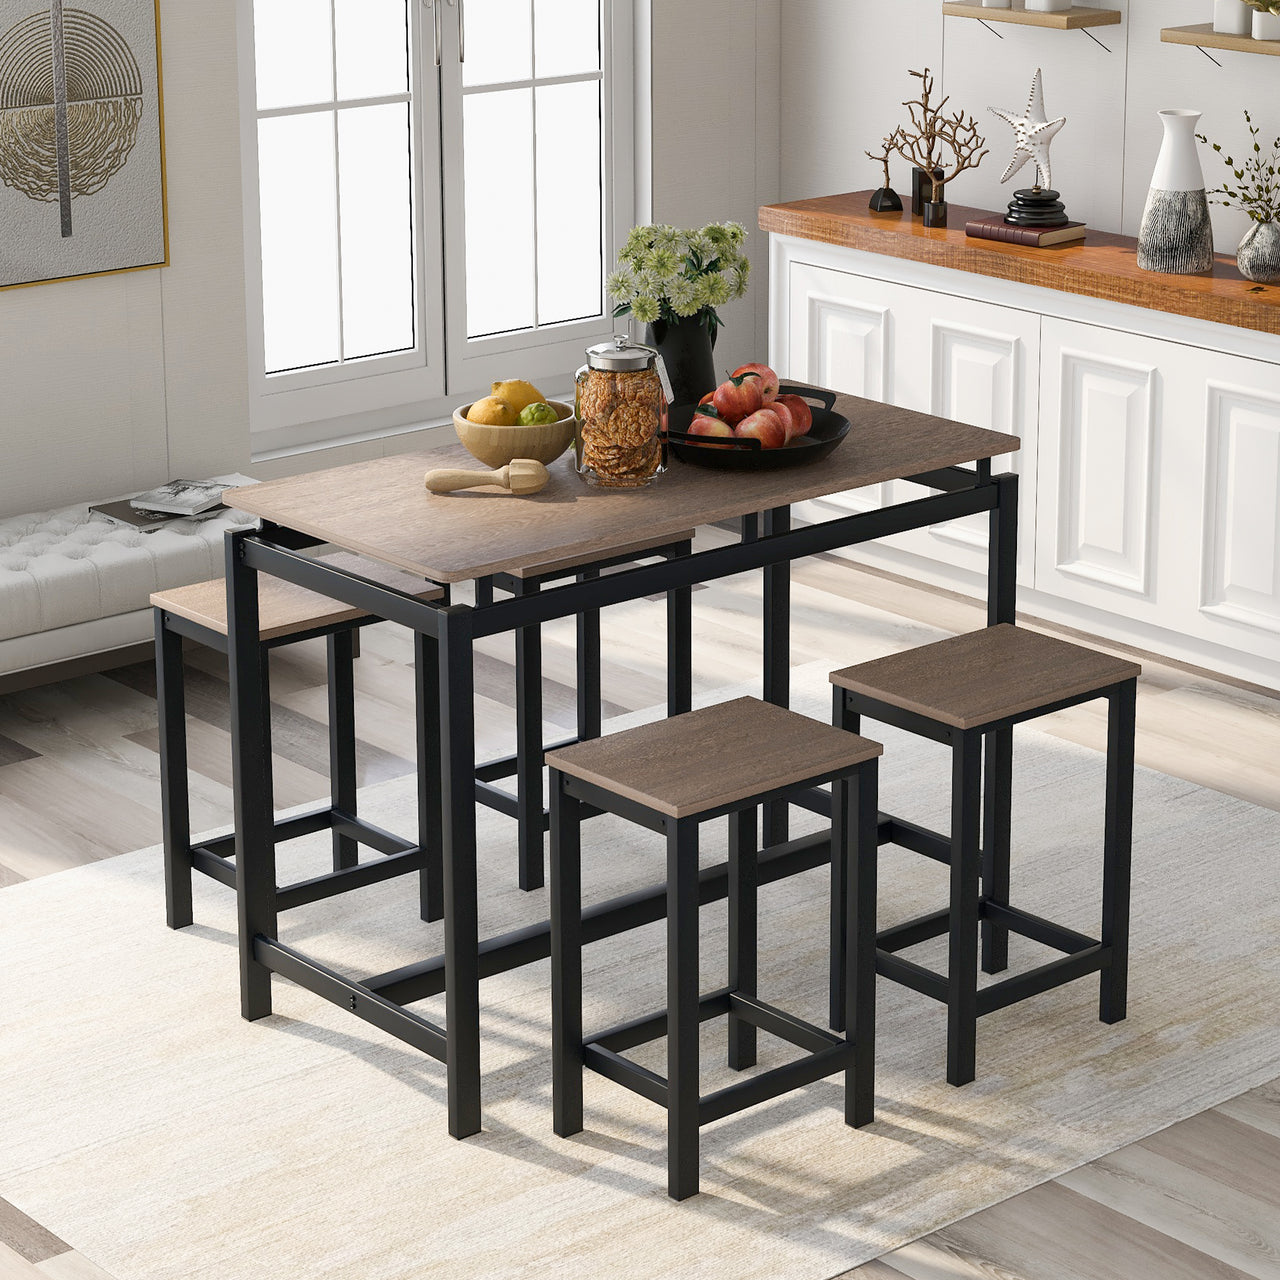 5-Piece Kitchen Counter Height Table Set, Dining Table with 4 Chairs (Dark Brown)